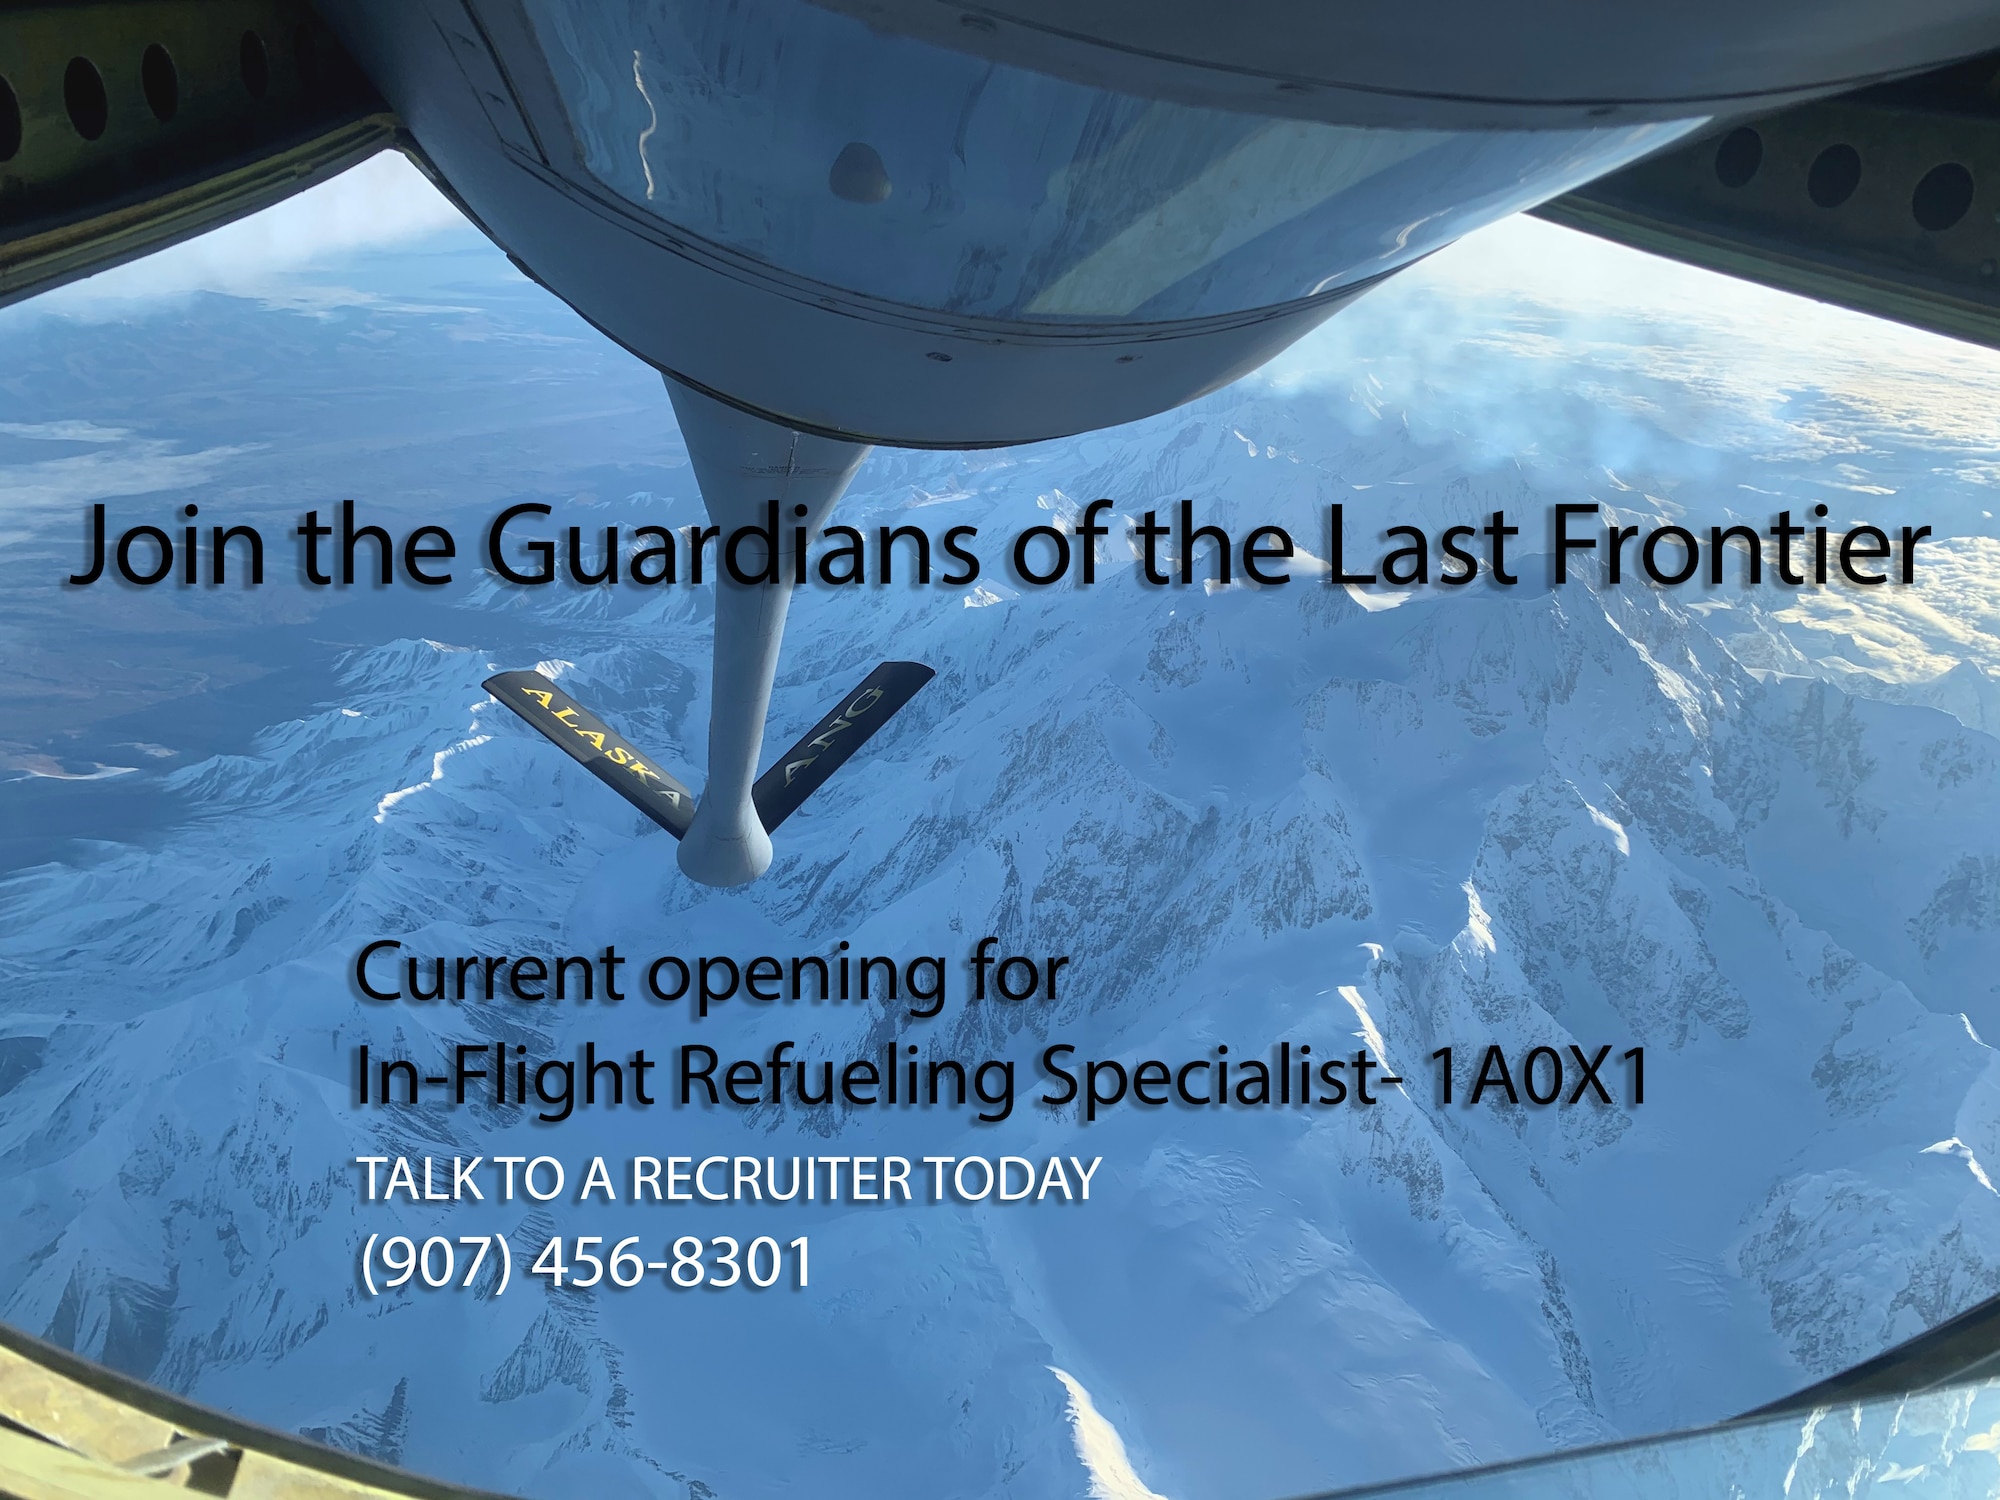 Joint the Guardians of the Last Frontier! Talk to a Recruiter Today (907) 456-8301